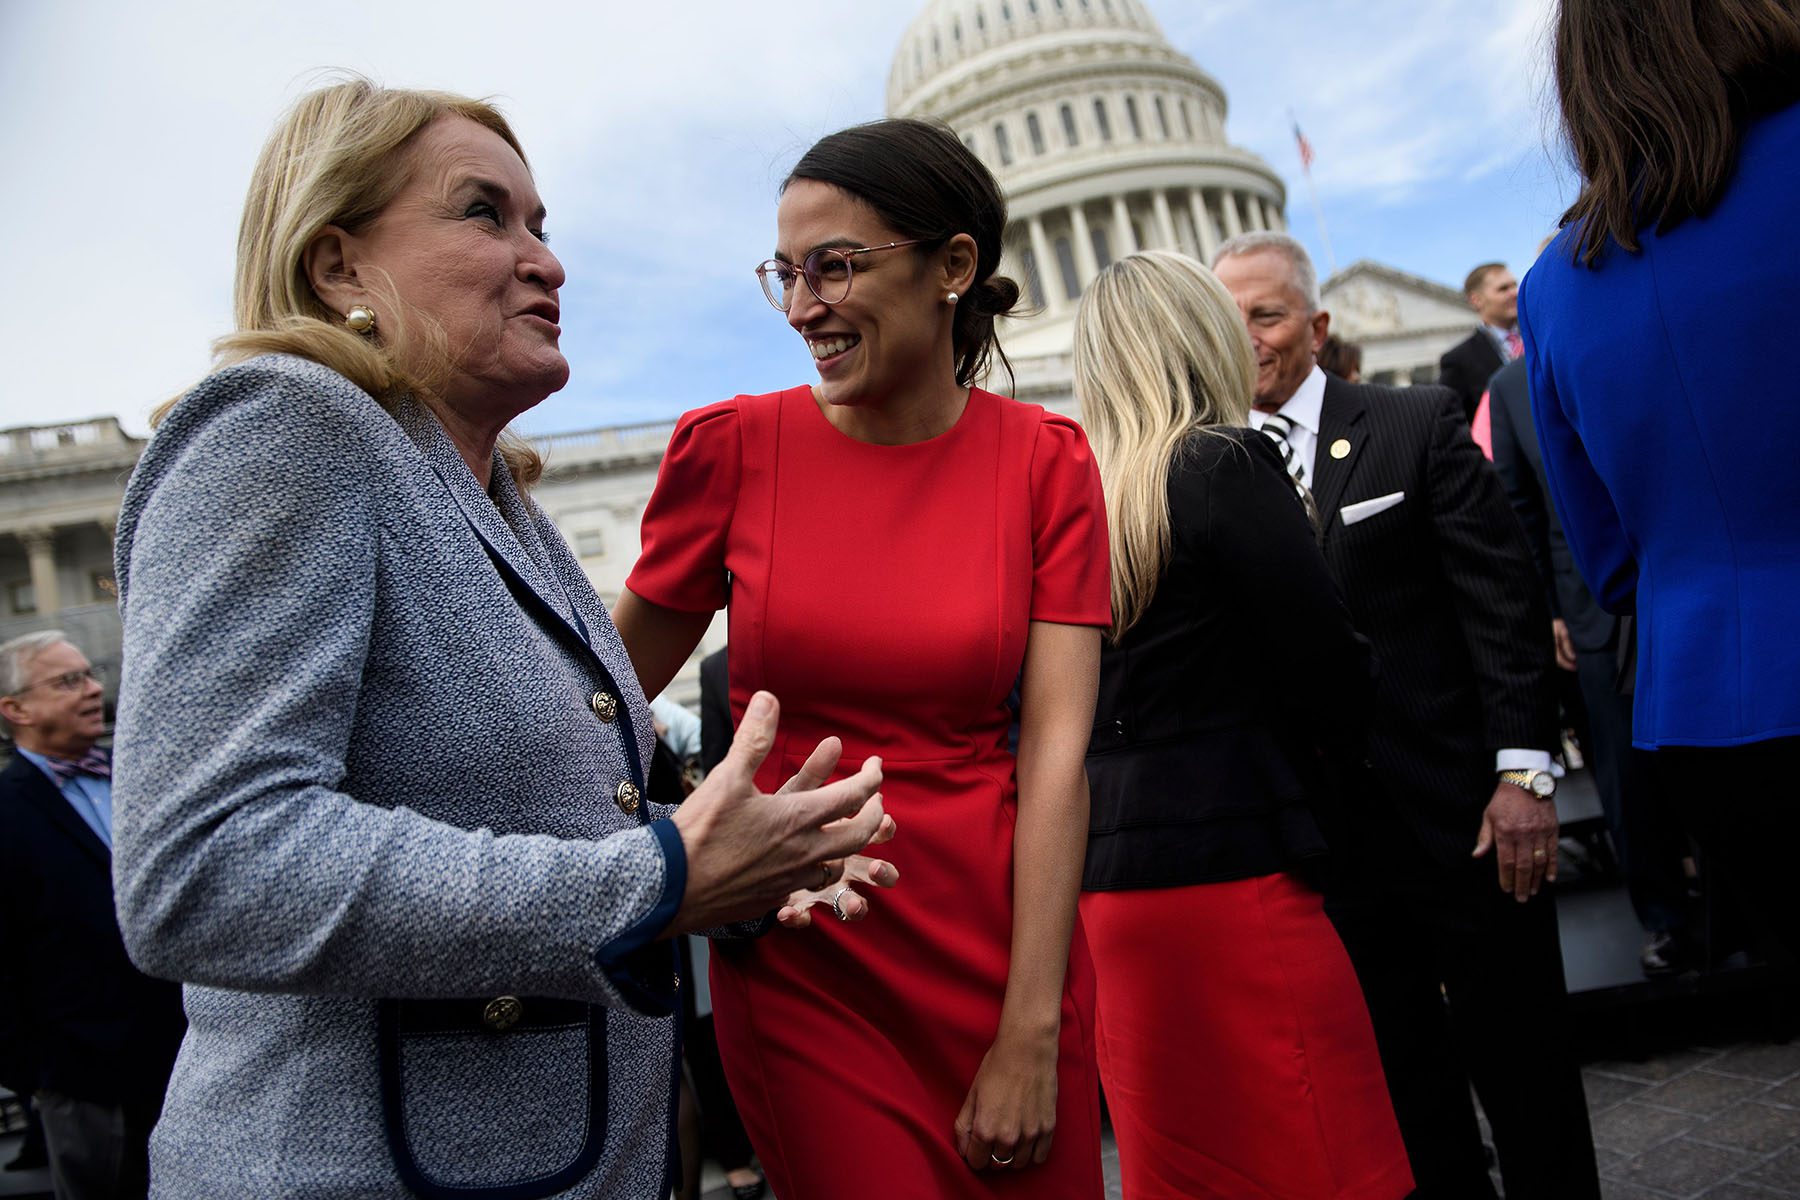 Alexandria Ocasio-Cortez laughs and chats with colleagues on Capitol Hill.